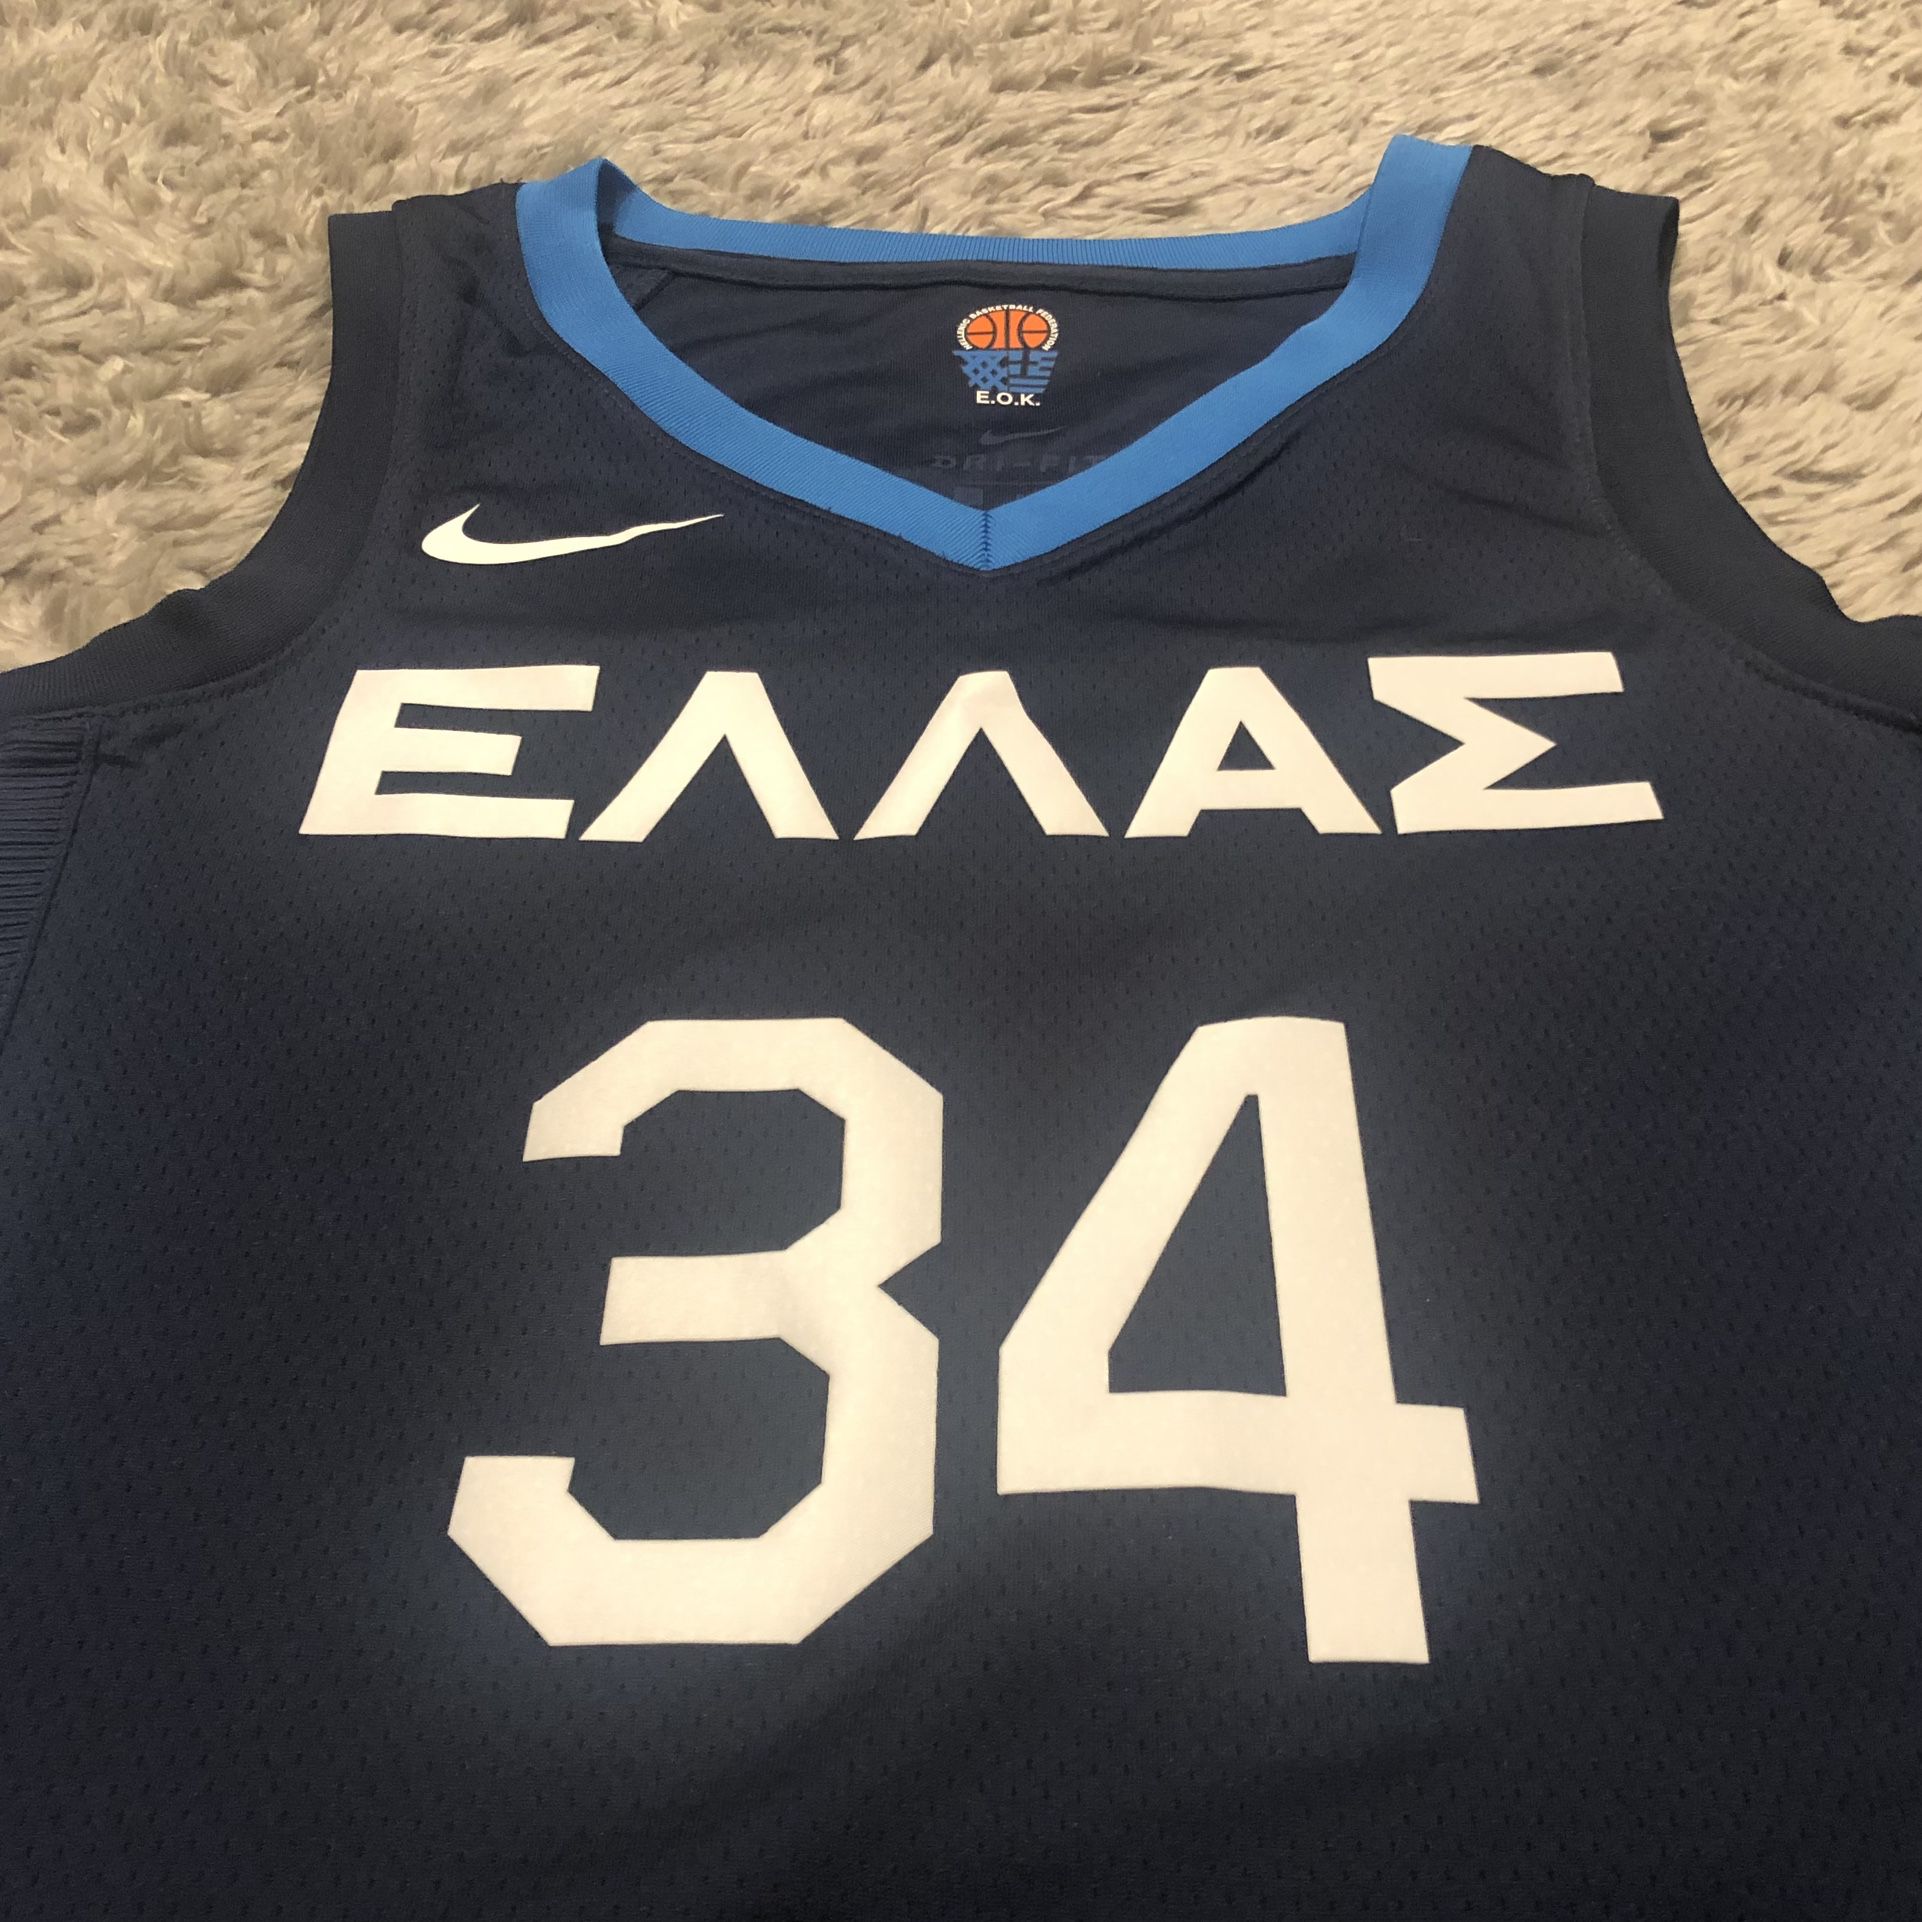 NBA Mens Small Stitched Jersey- Giannis Antetokounmpo #34 Milwaukee Bucks  for Sale in Avon, IN - OfferUp